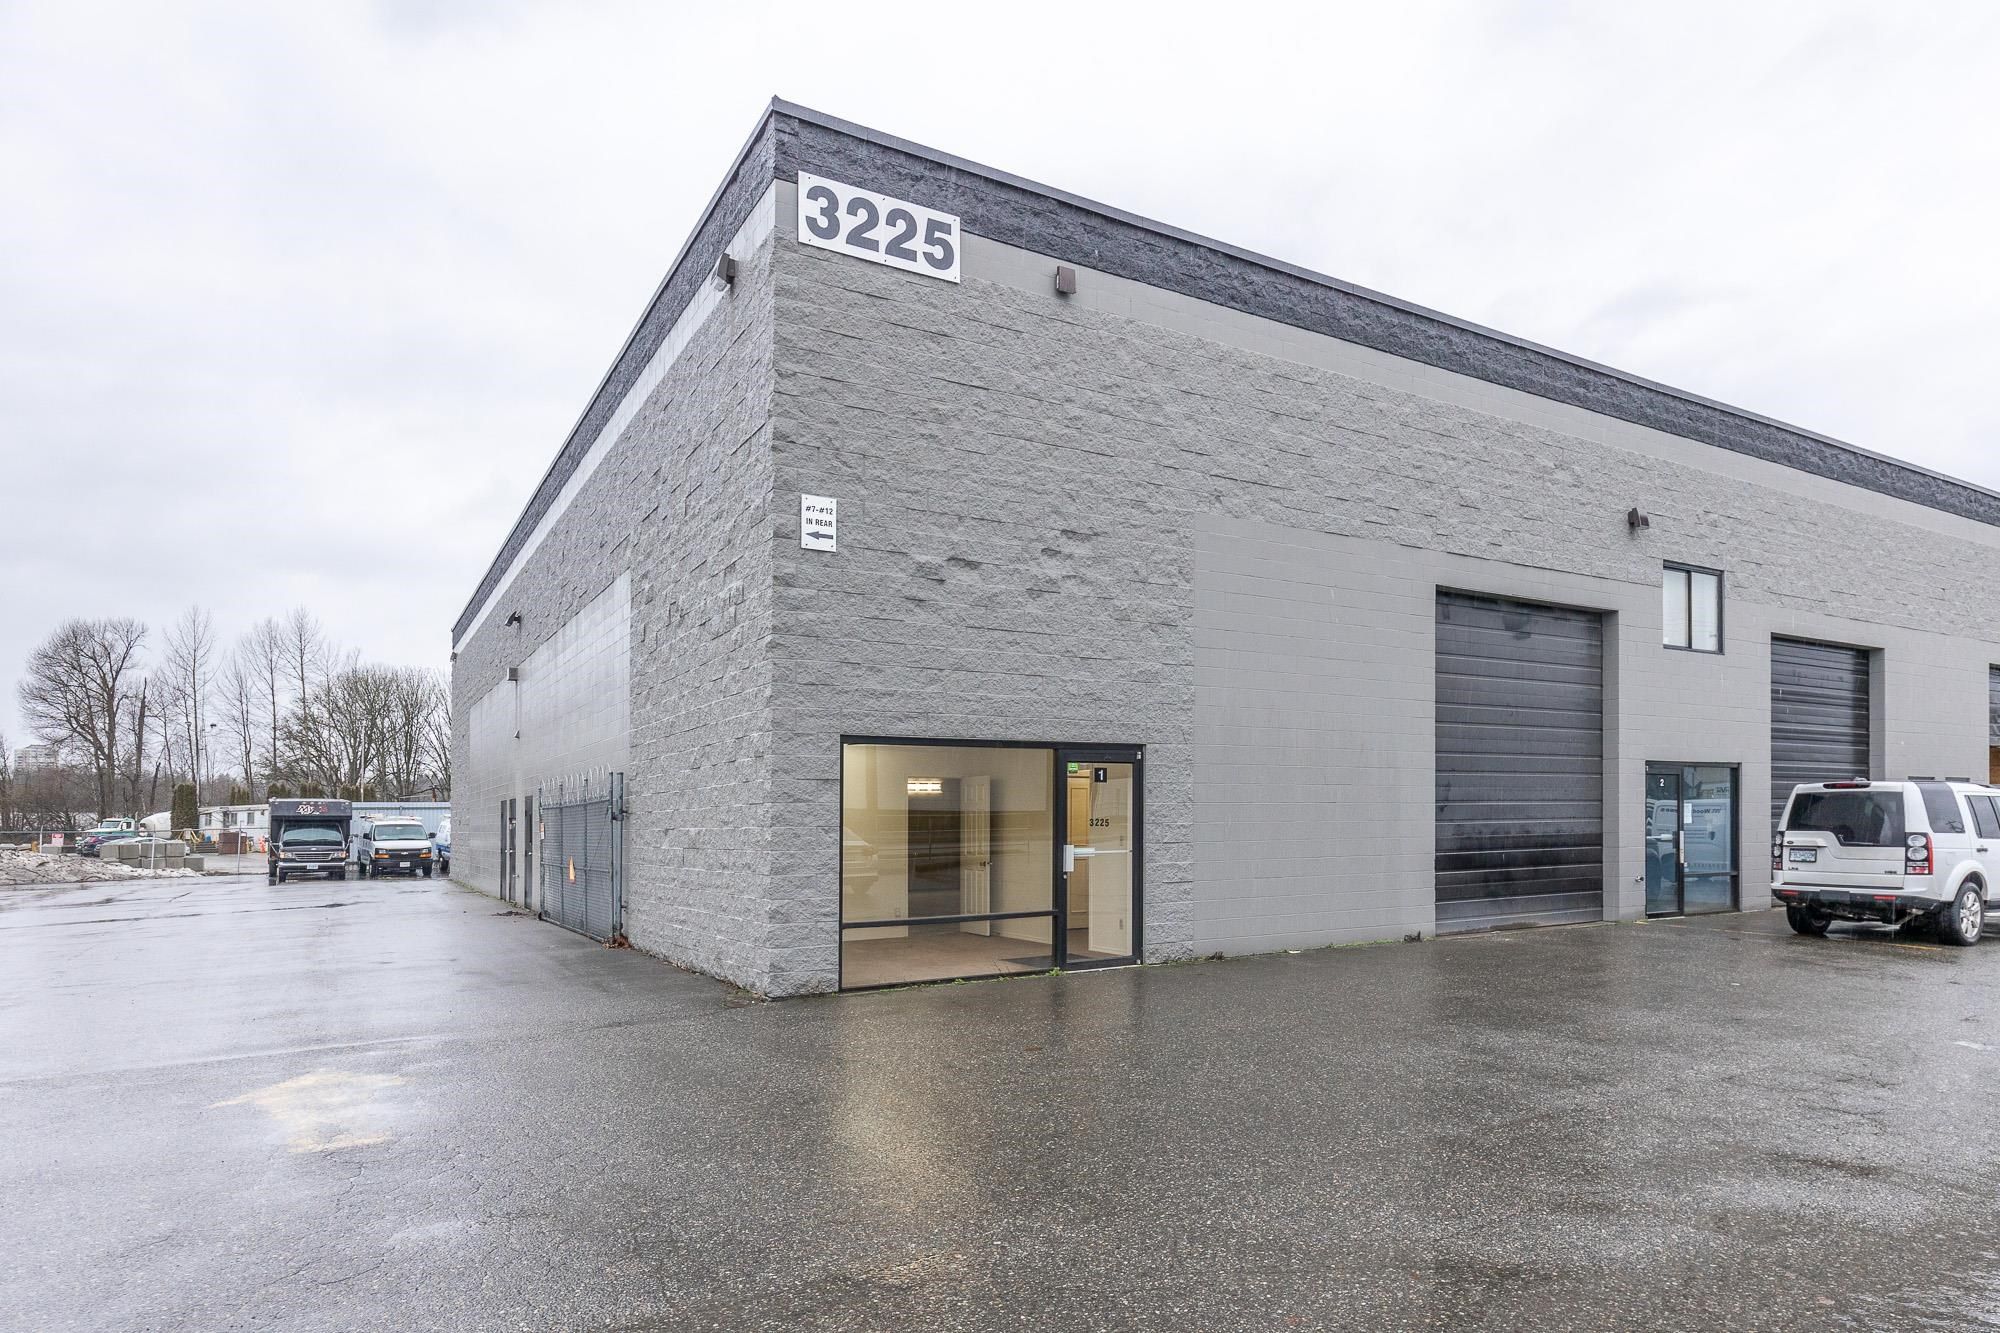 Main Photo: 1 3225 MCCALLUM Road in Abbotsford: Central Abbotsford Industrial for sale : MLS®# C8048745